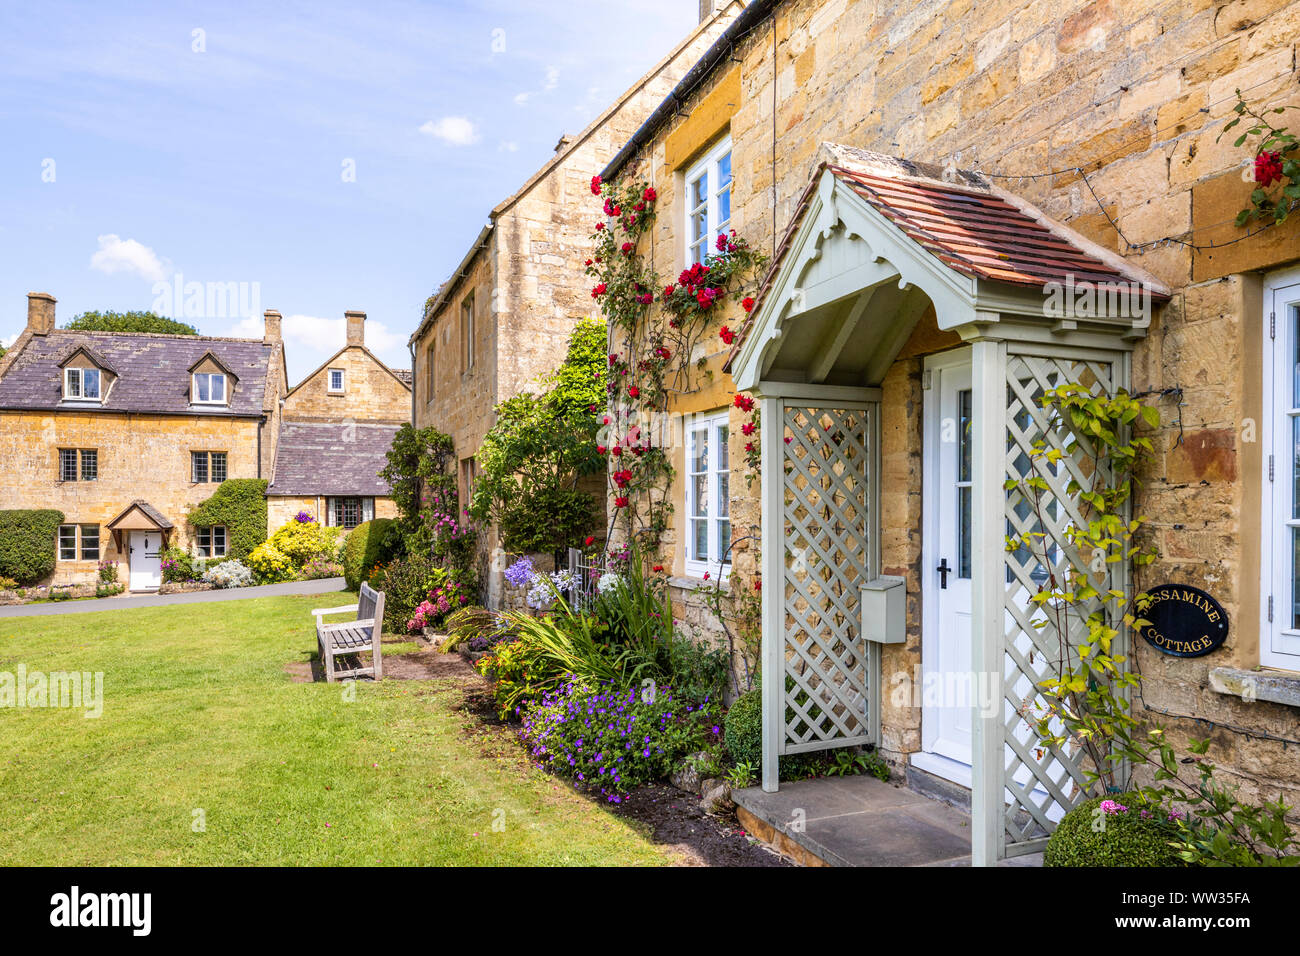 Old stone cottages in the Cotswold village of Stanton, Gloucestershire UK Stock Photo